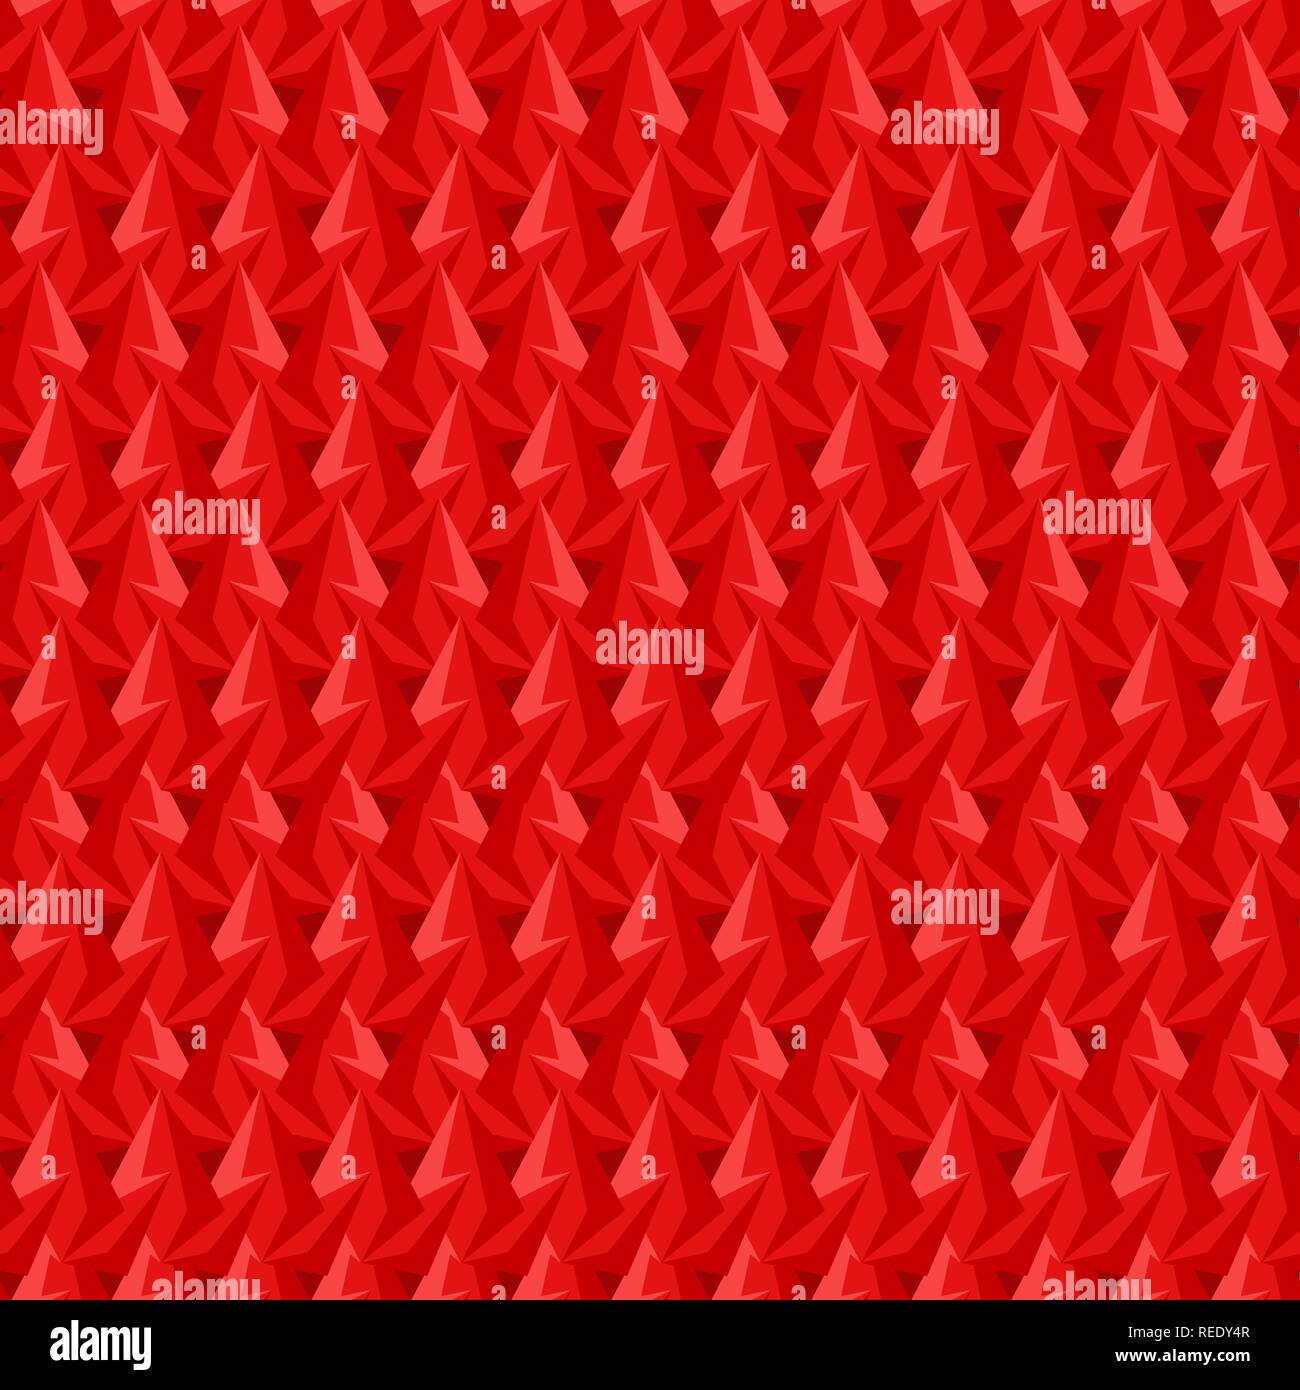 Red thorns pattern seamless. Abstract background. Spikes texture Stock Vector